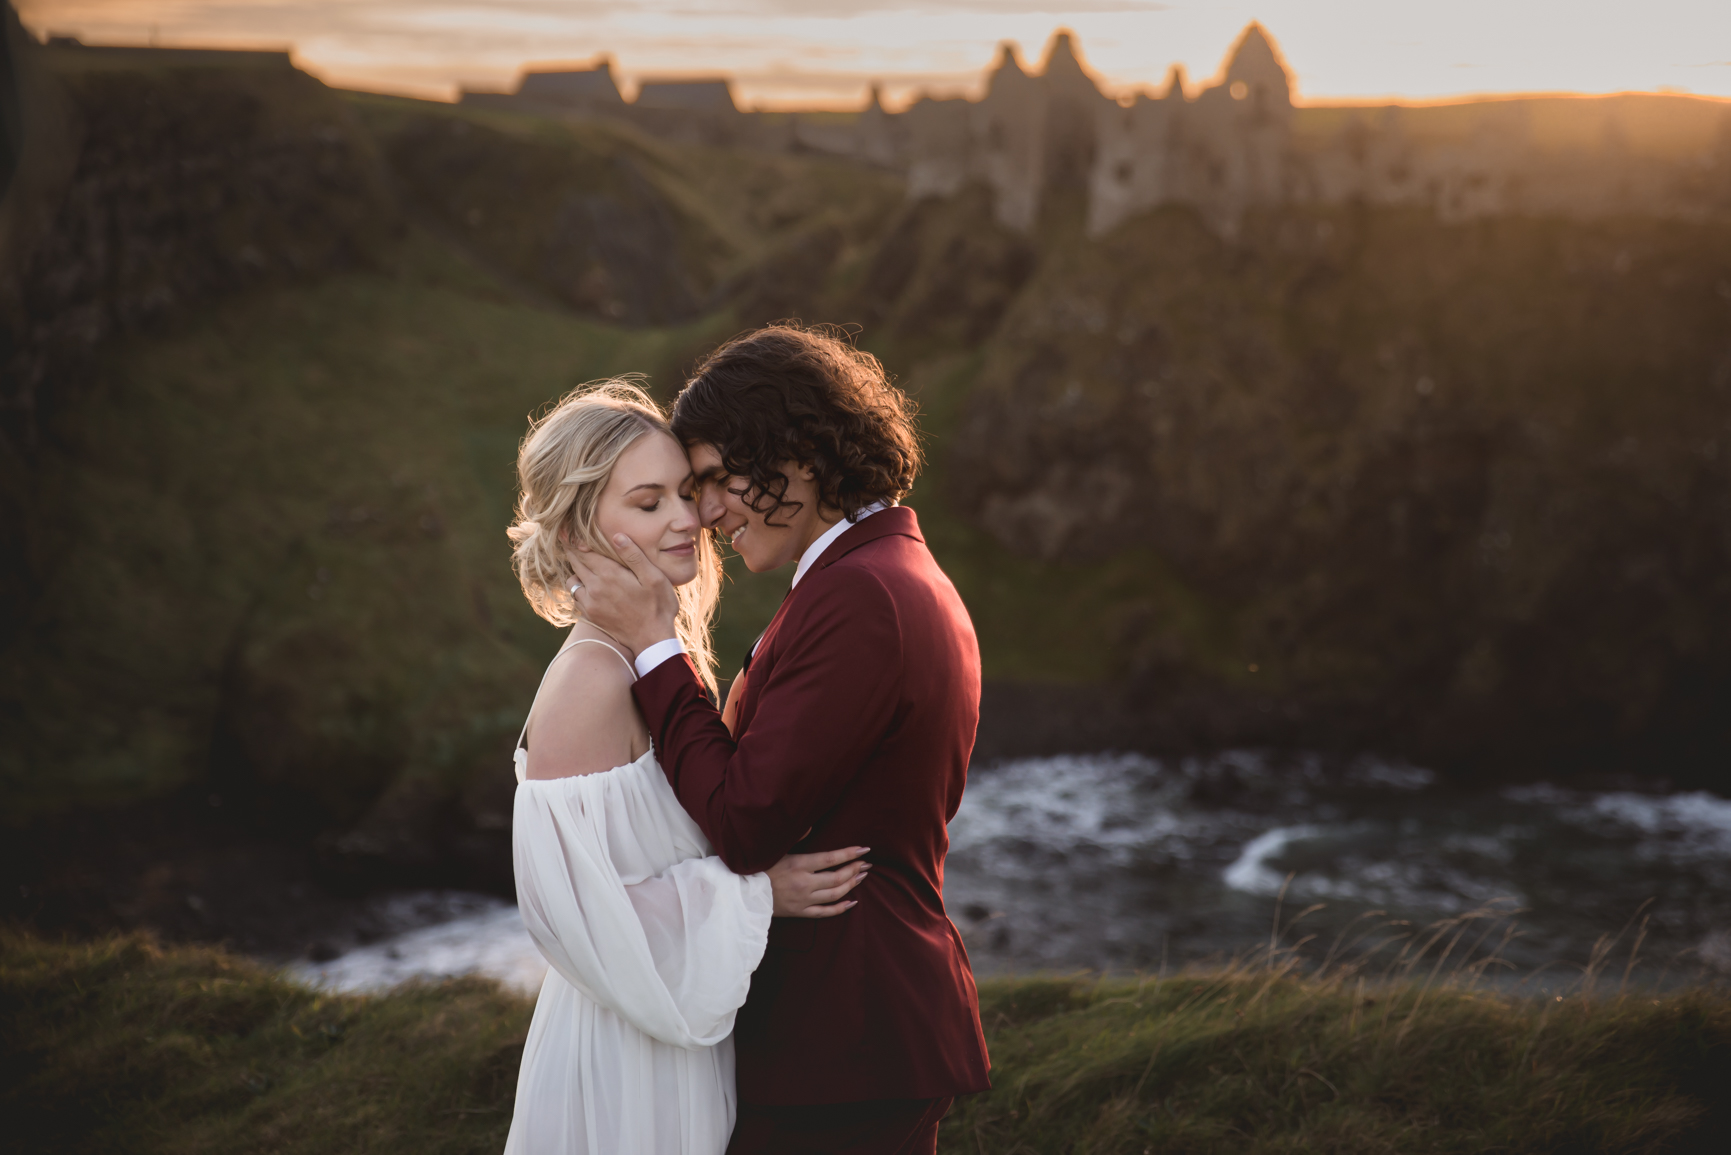 Bride and Groom sharing a kiss on clifftop sunset scene